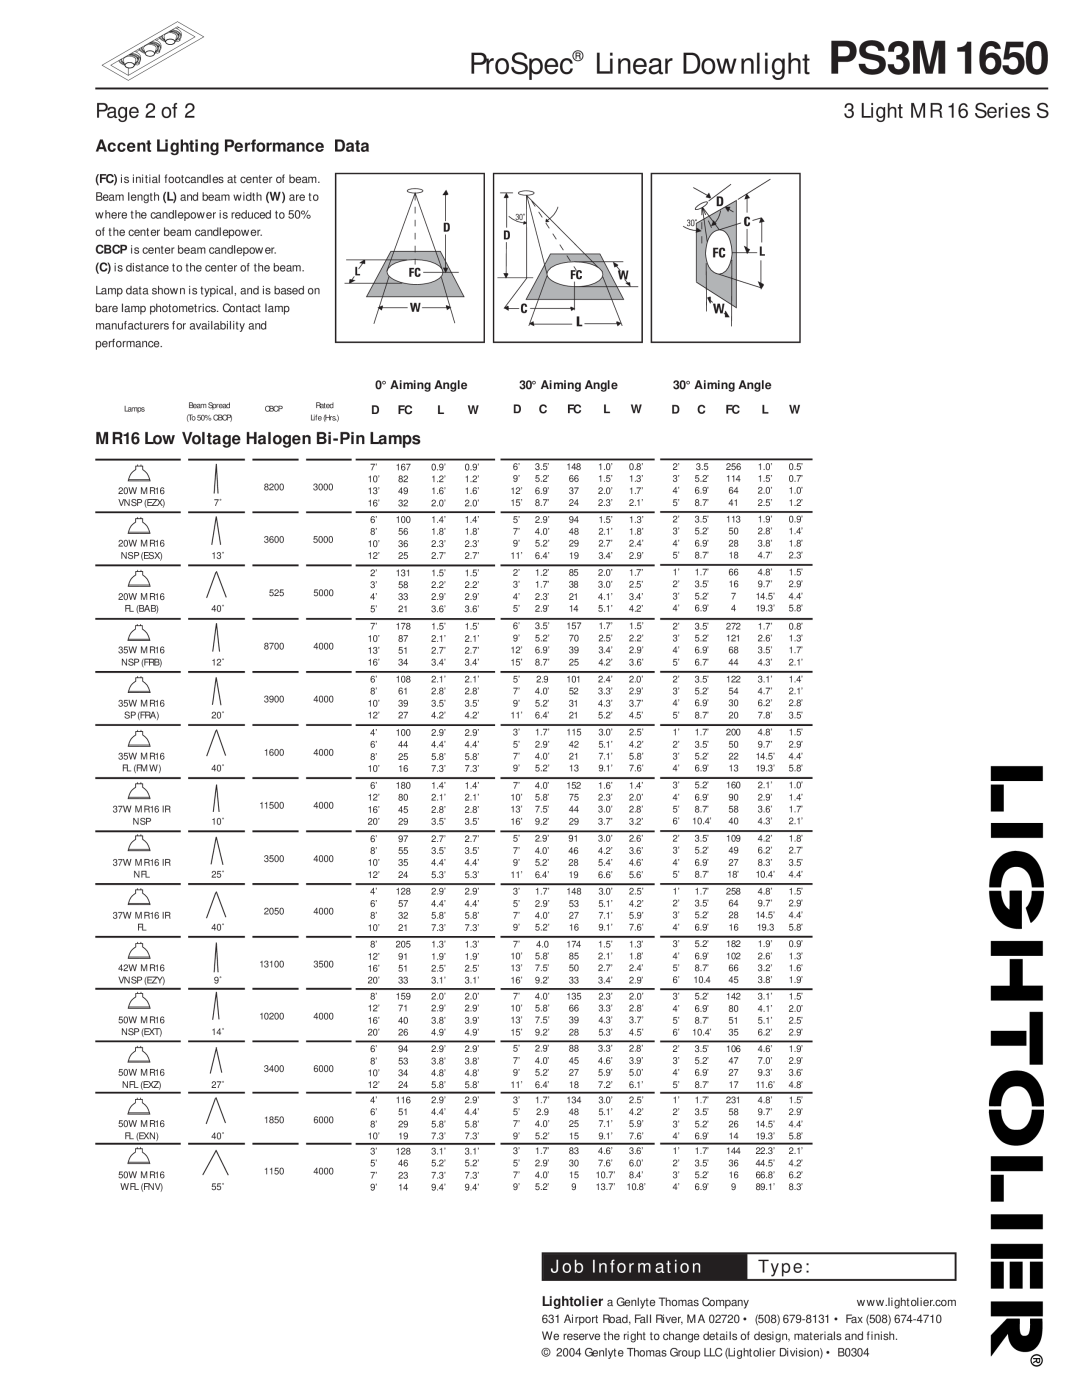 Lightolier PS3M1650 Page 2 of, Light MR 16 Series S, Accent Lighting Performance Data, Aiming Angle, D Fc, D C Fc L W 